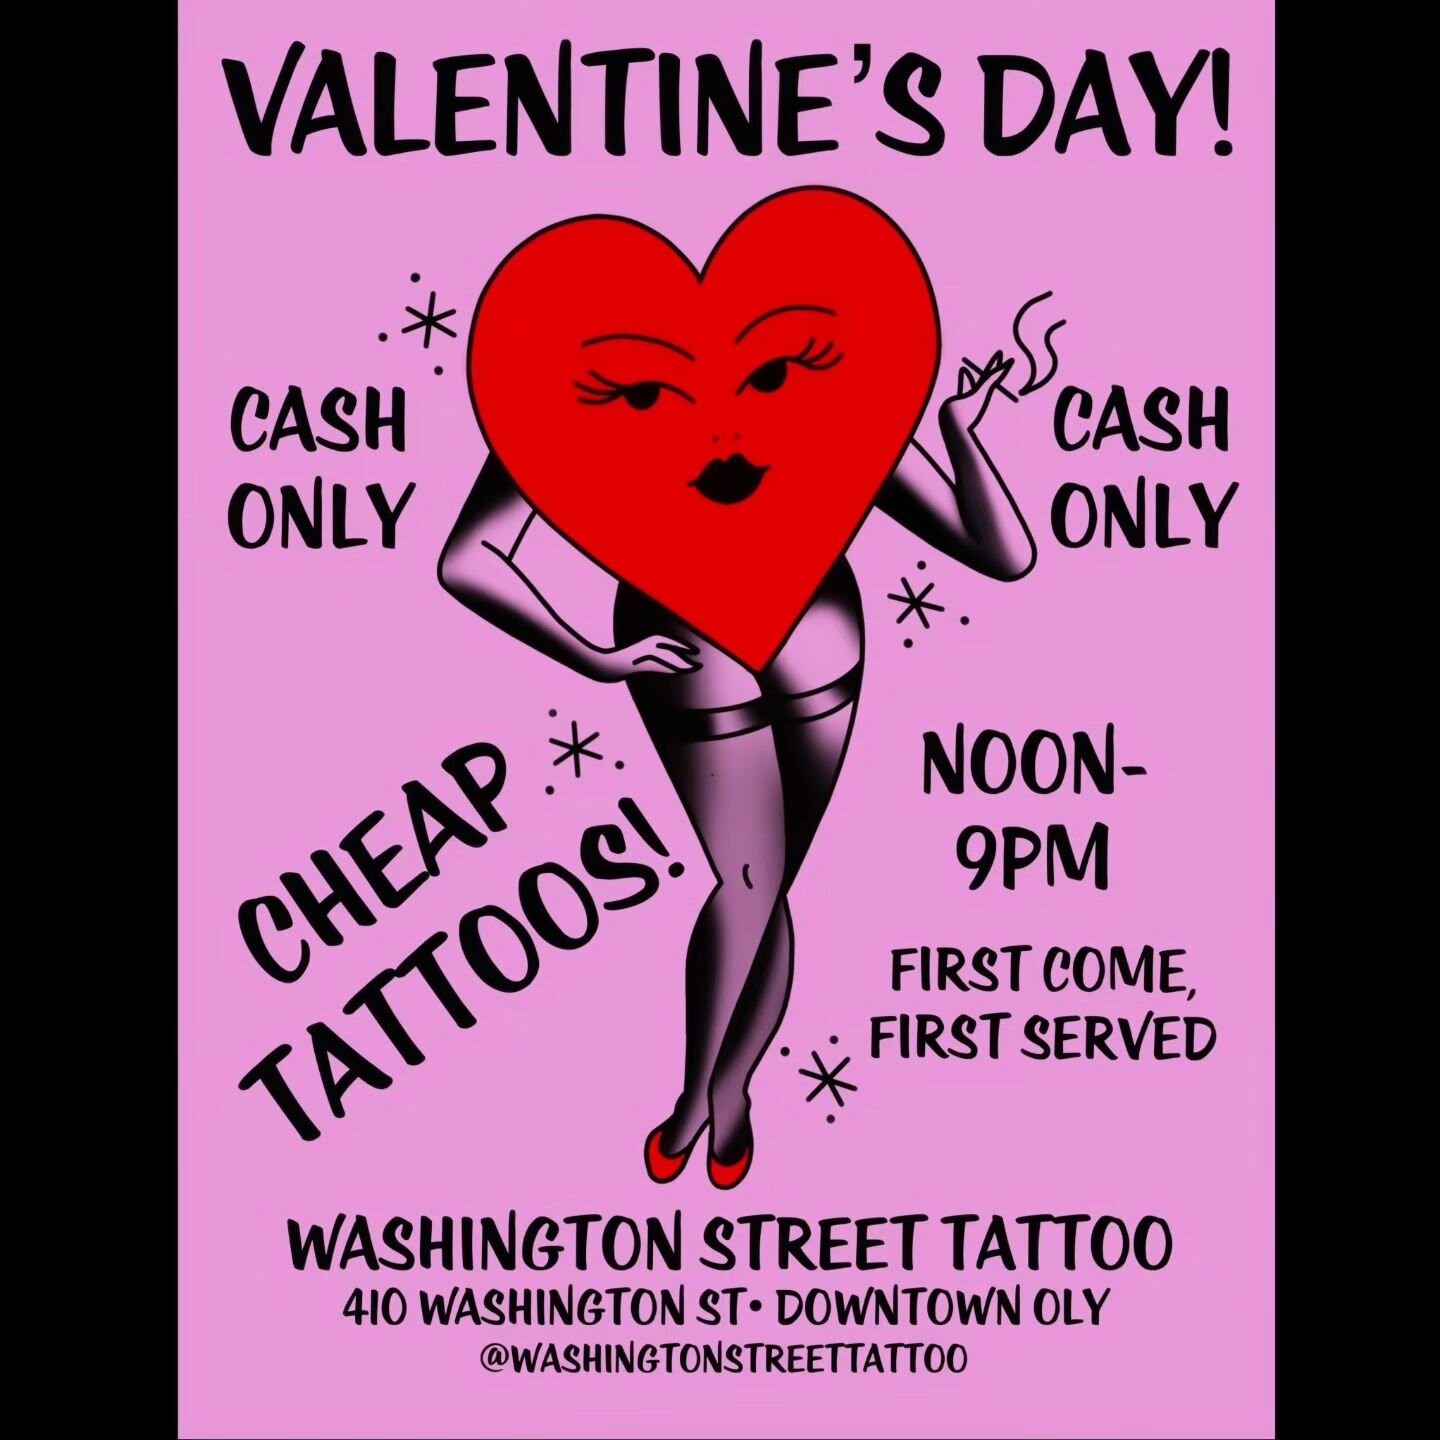 Designs will be posted this week. Stay tuned... #valentinestattoo  #becauseflowersdie #olympia @washingtonstreettattoo